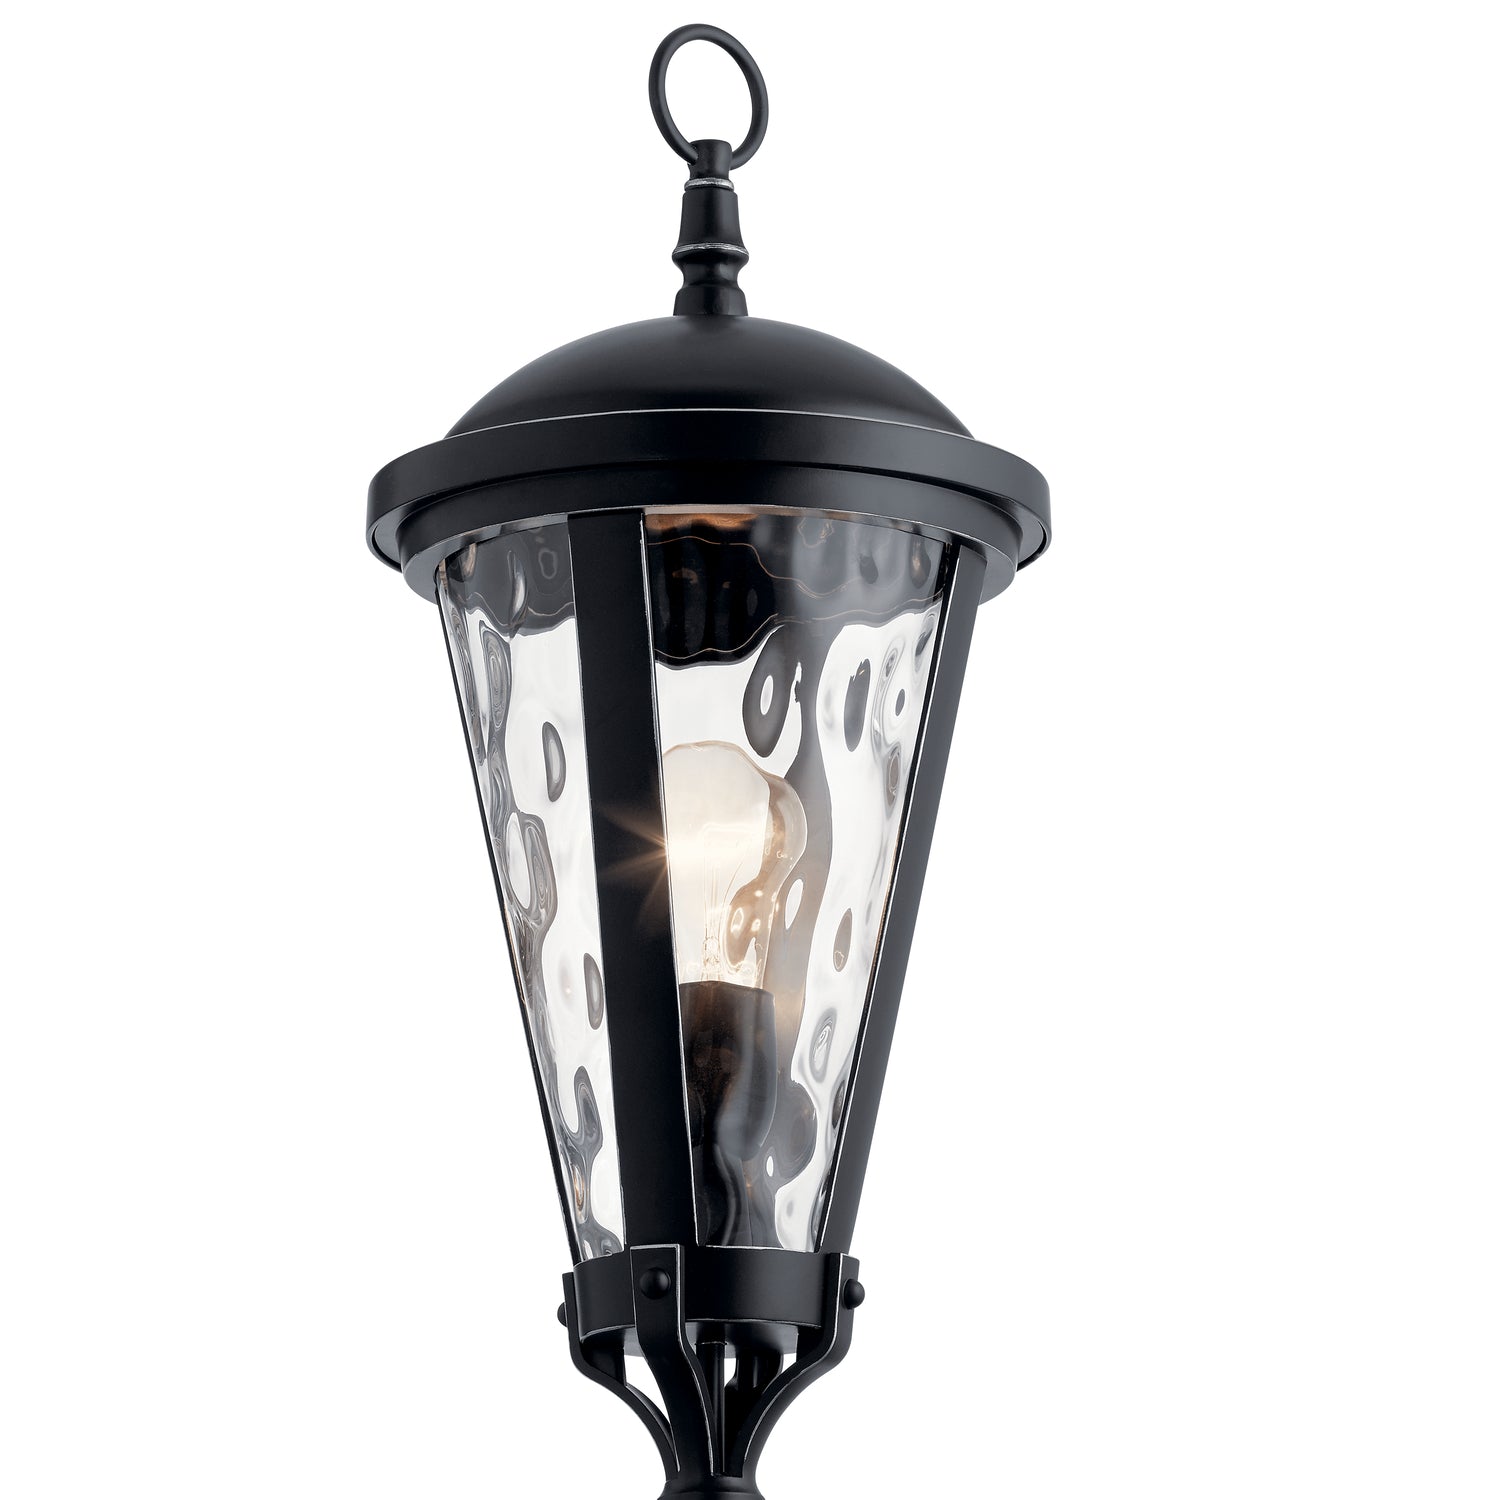 Cresleigh Post Light Black with Silver Highlights